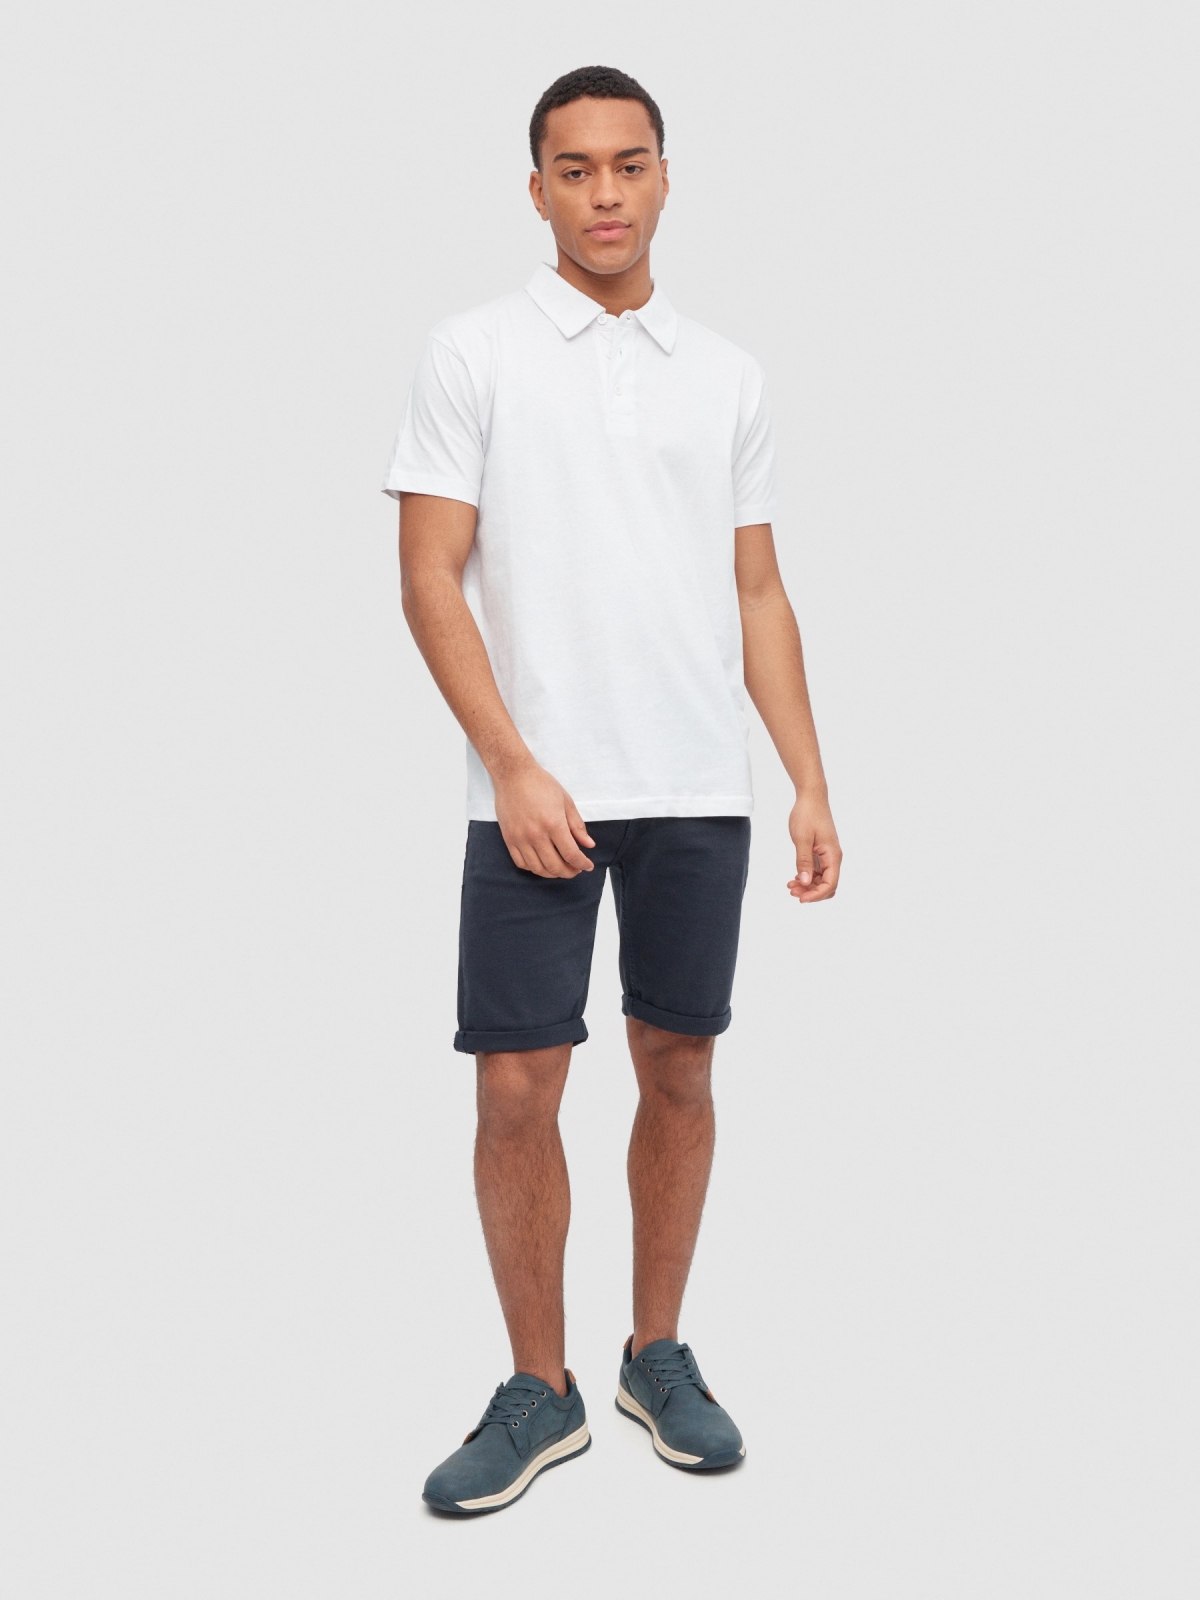 Basic short-sleeved polo shirt white front view